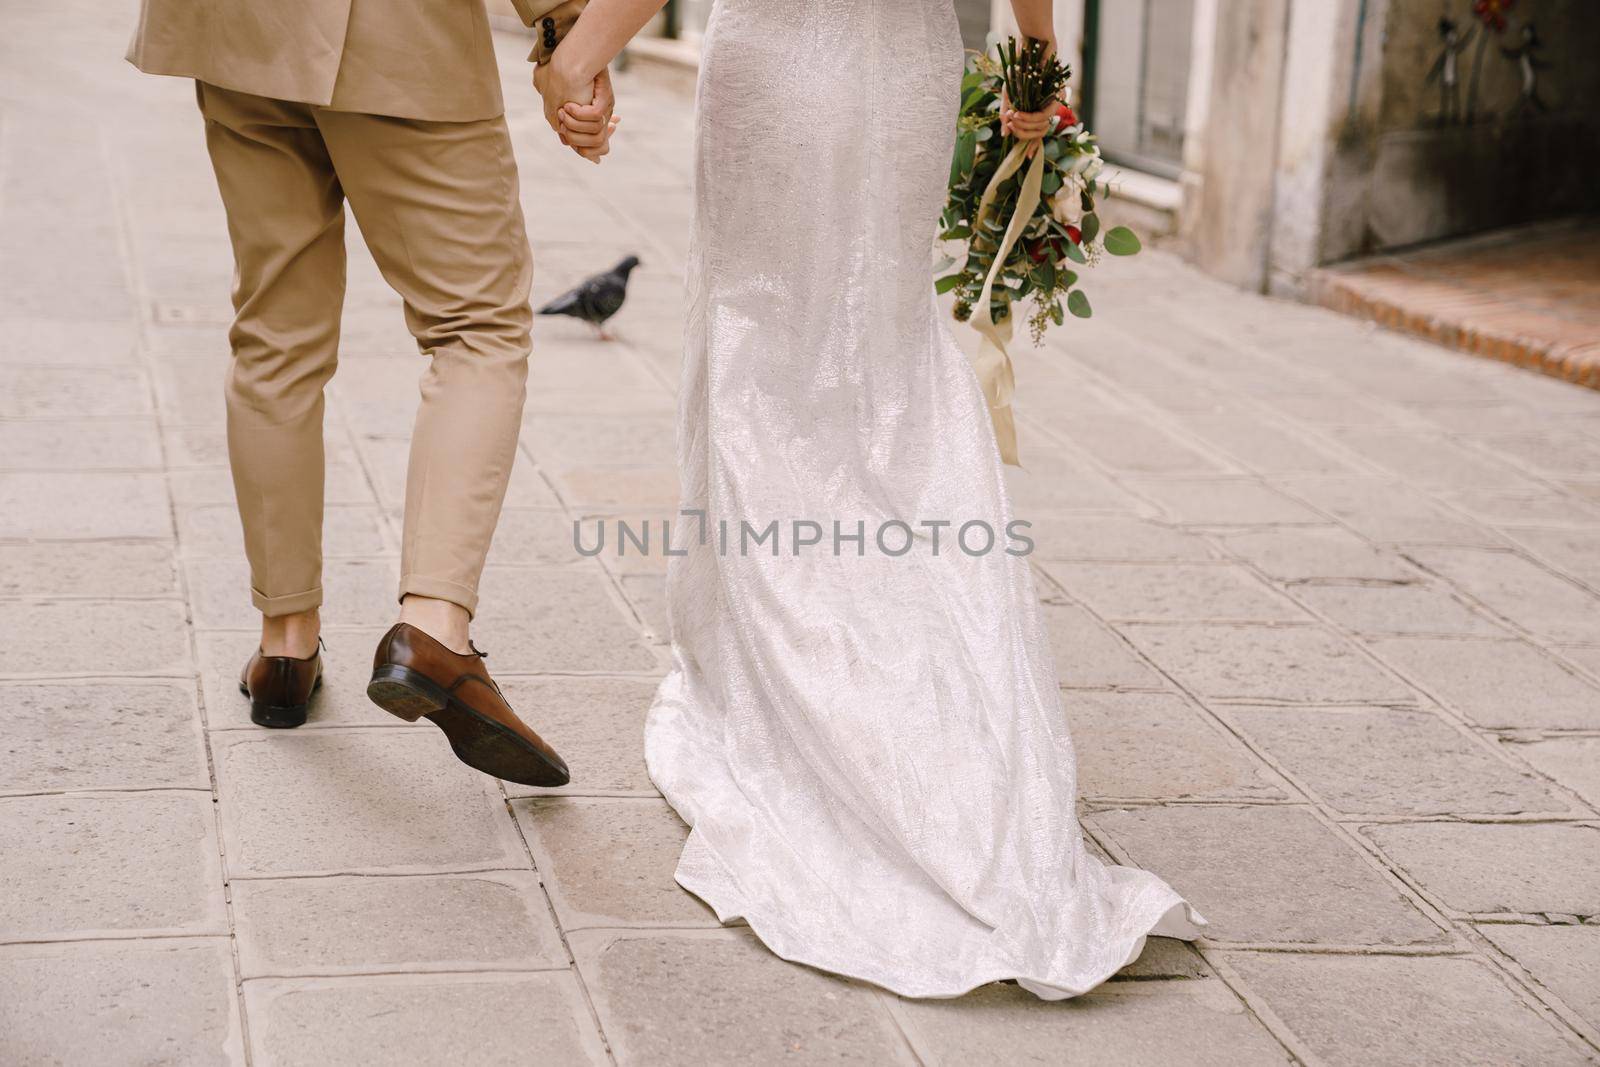 The bride and groom walk through the deserted streets of the city. Close-up of the newlyweds' feet and a long train of the bride's dress.